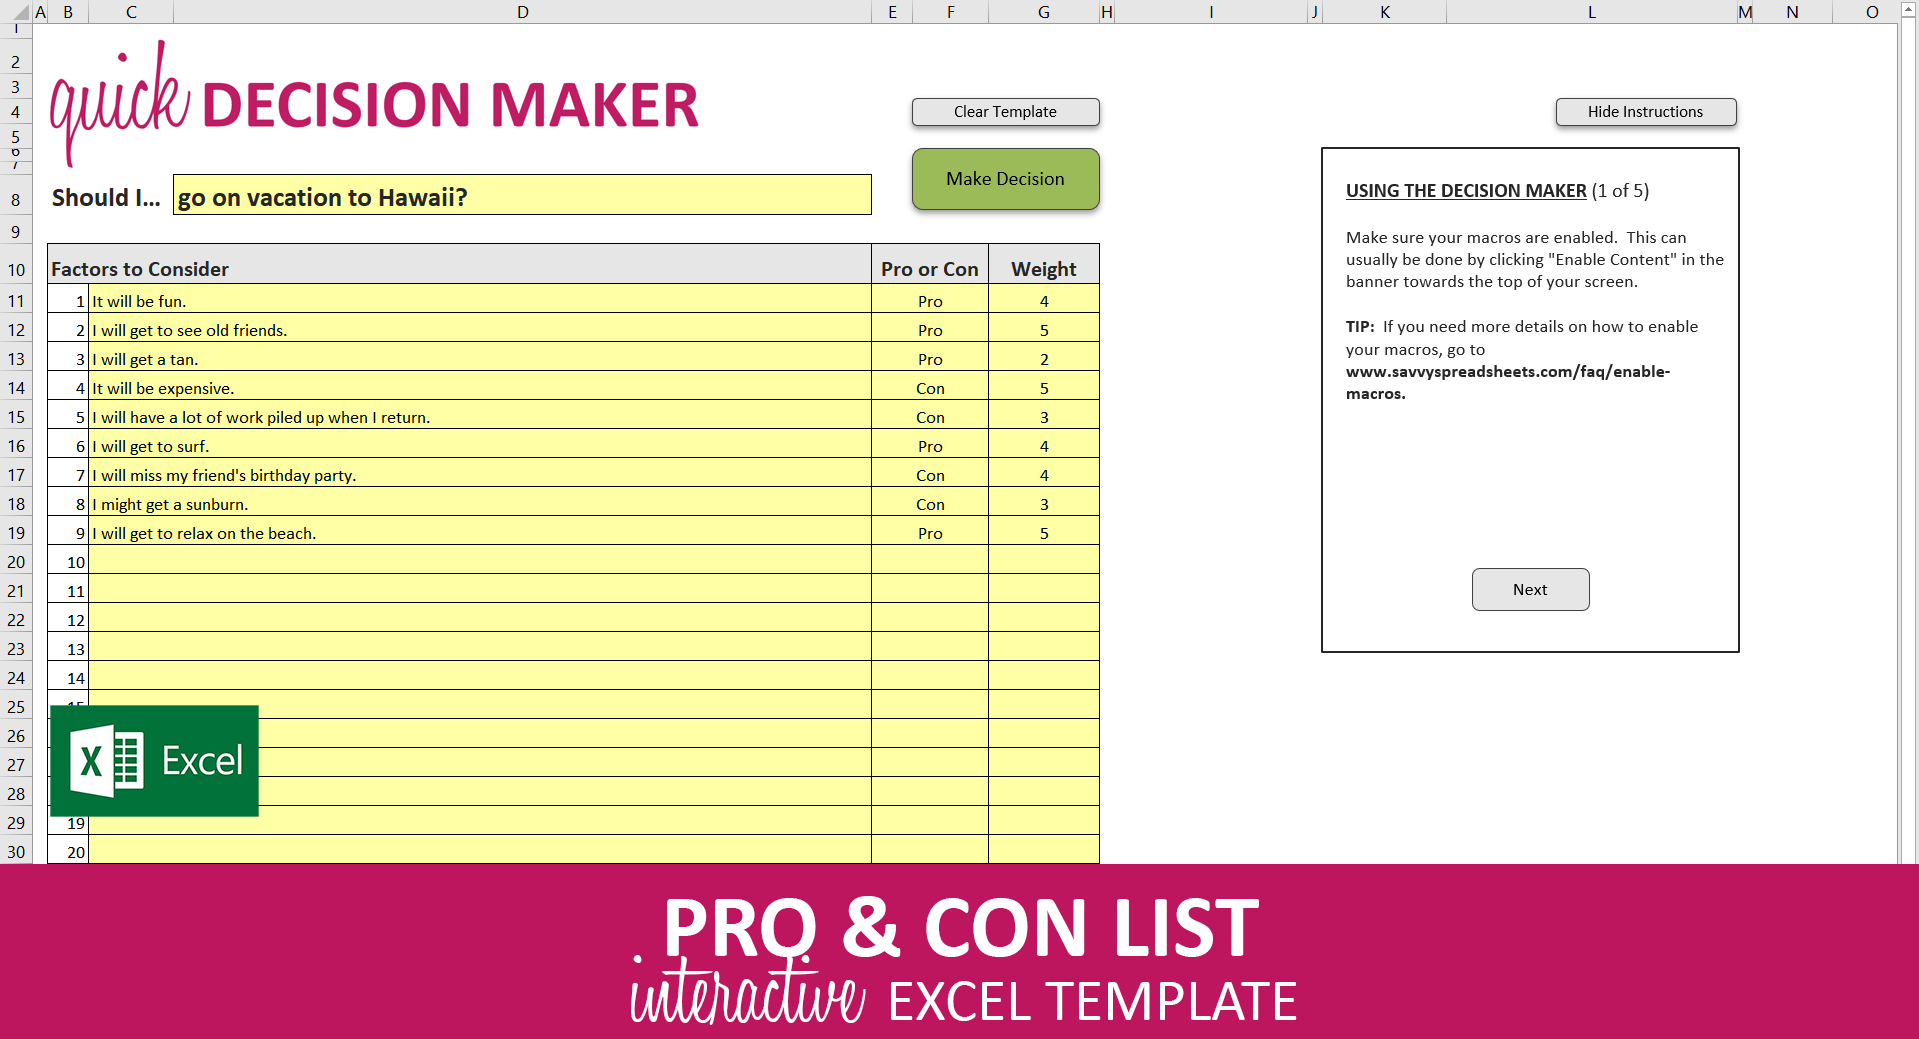 pros-and-cons-excel-template